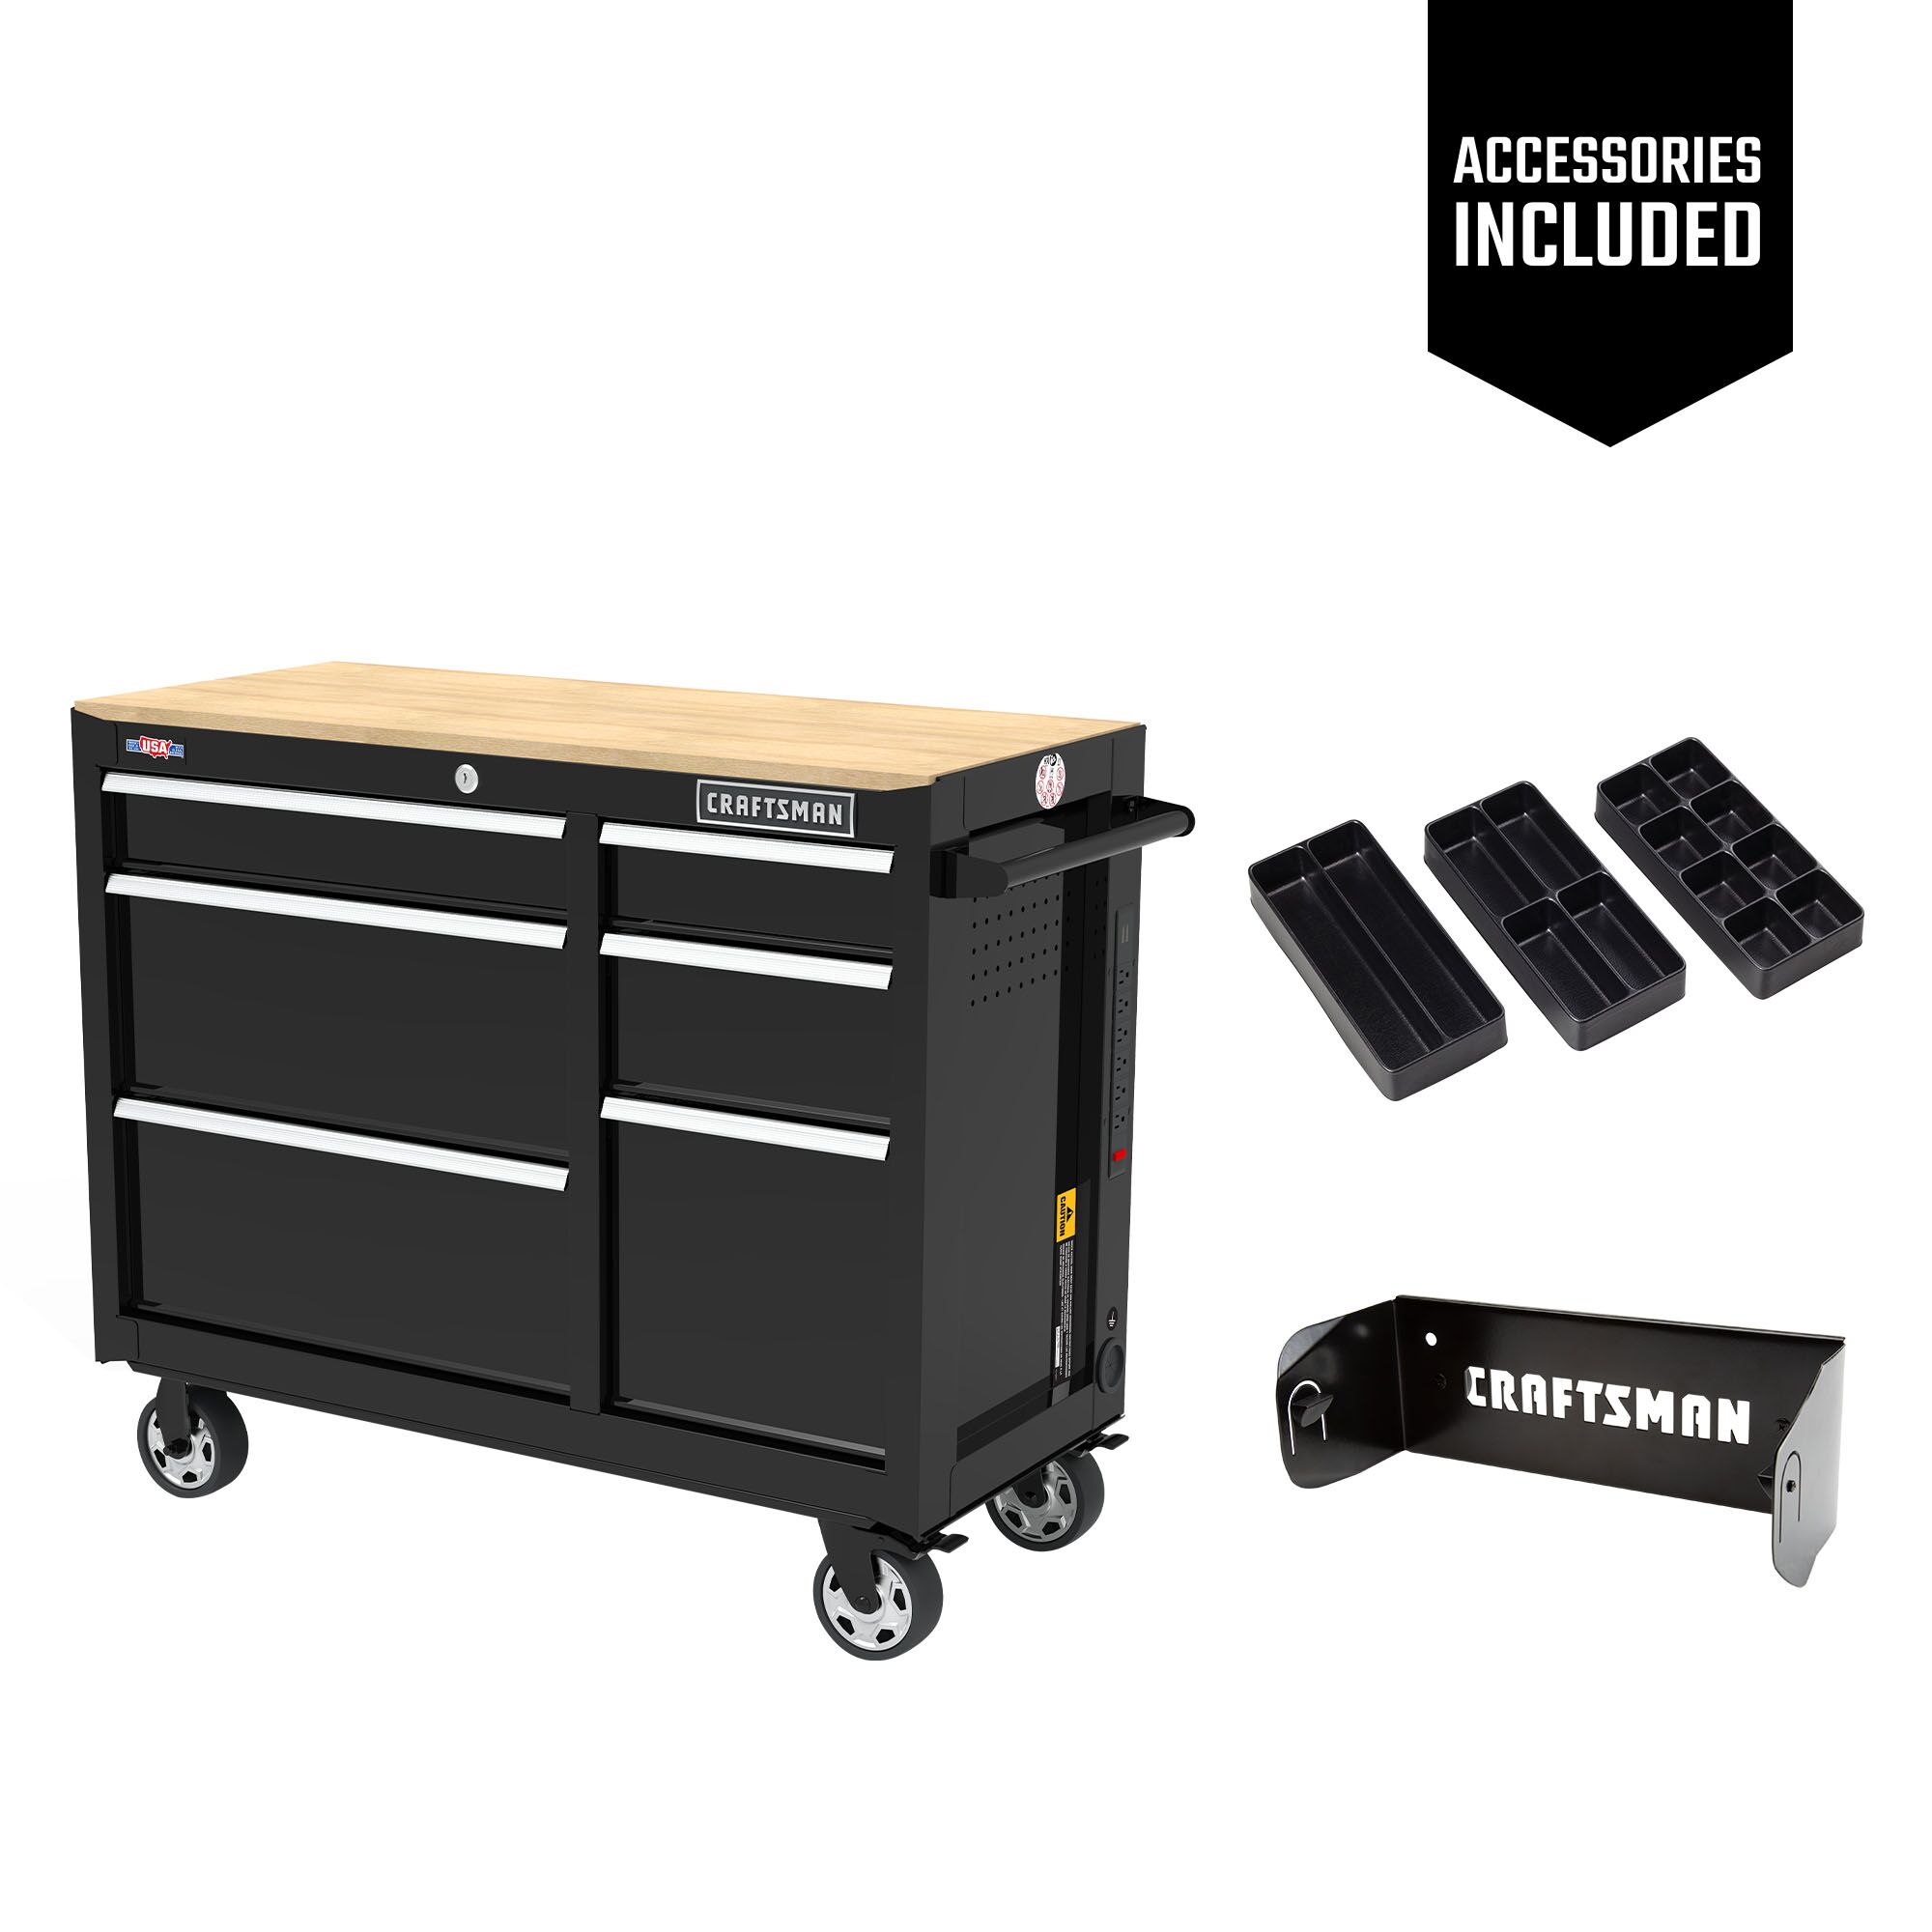 One black CRAFTSMAN 41 inch Wide 6-Drawer Mobile Workbench with three black Cabinet Drawer Trays and one black Magnetic Paper Towel Holder included